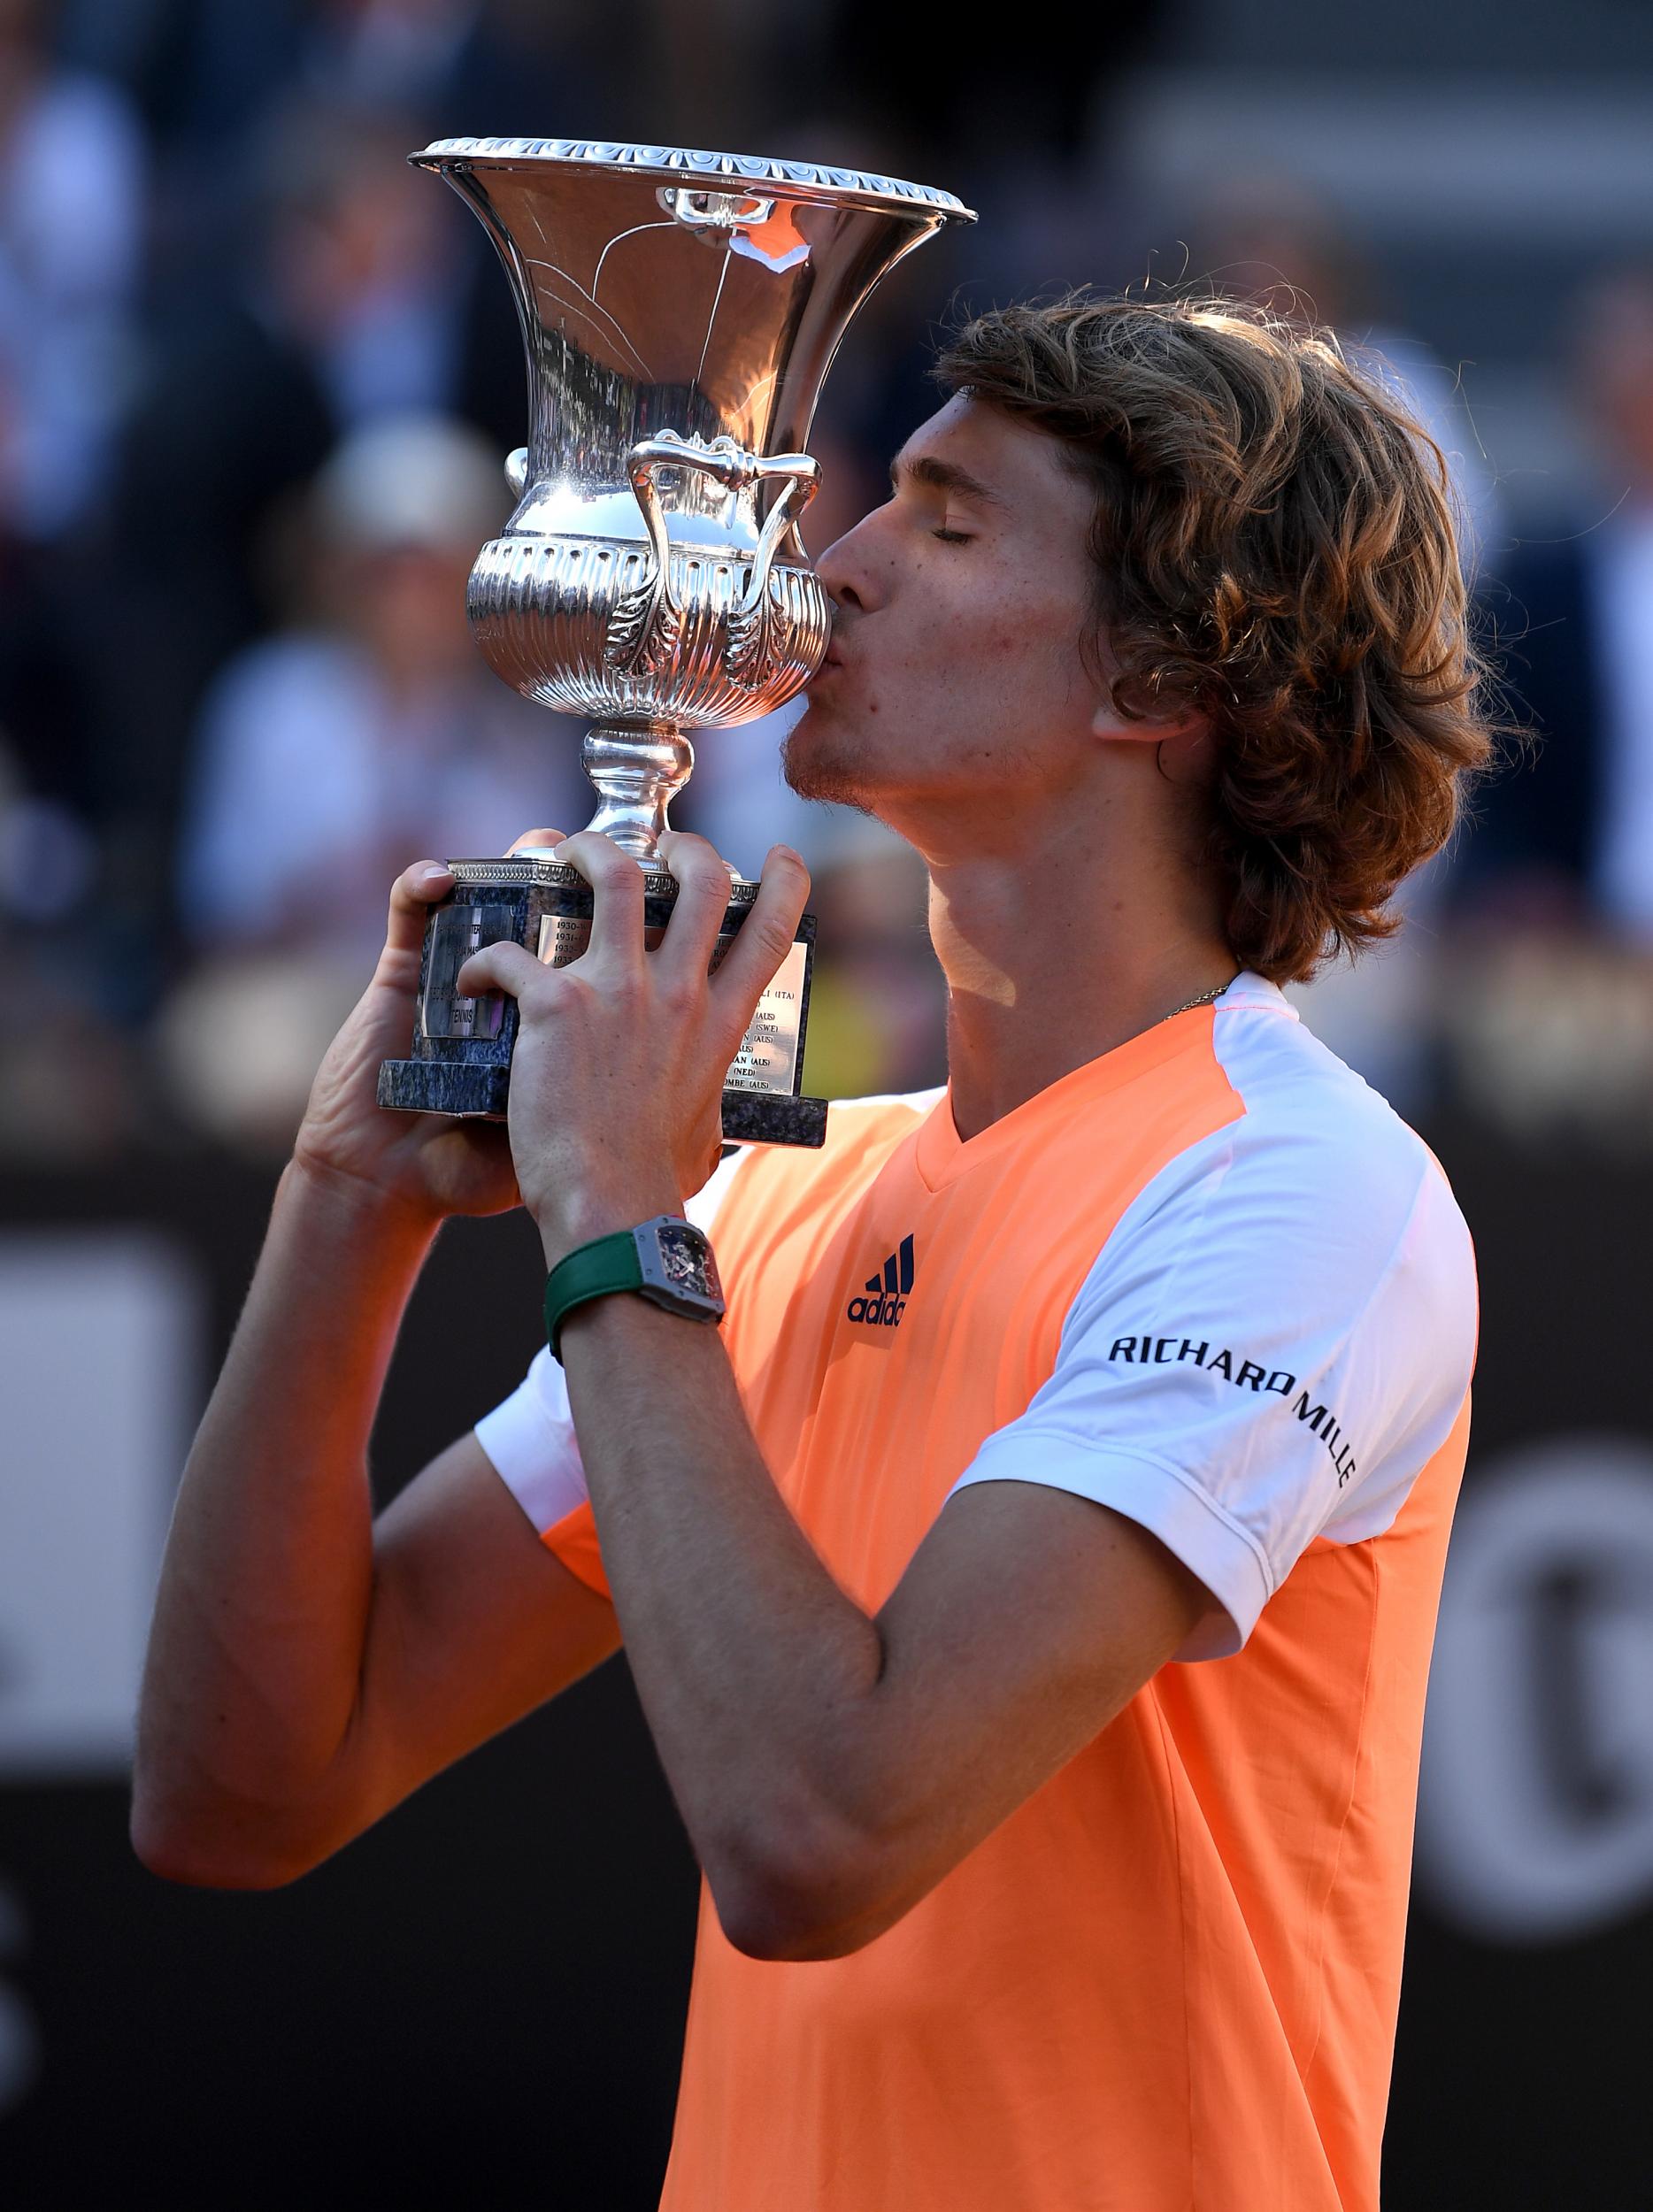 In Rome Zverev became the first man born in the 1990s to win an ATP Masters 1000 title